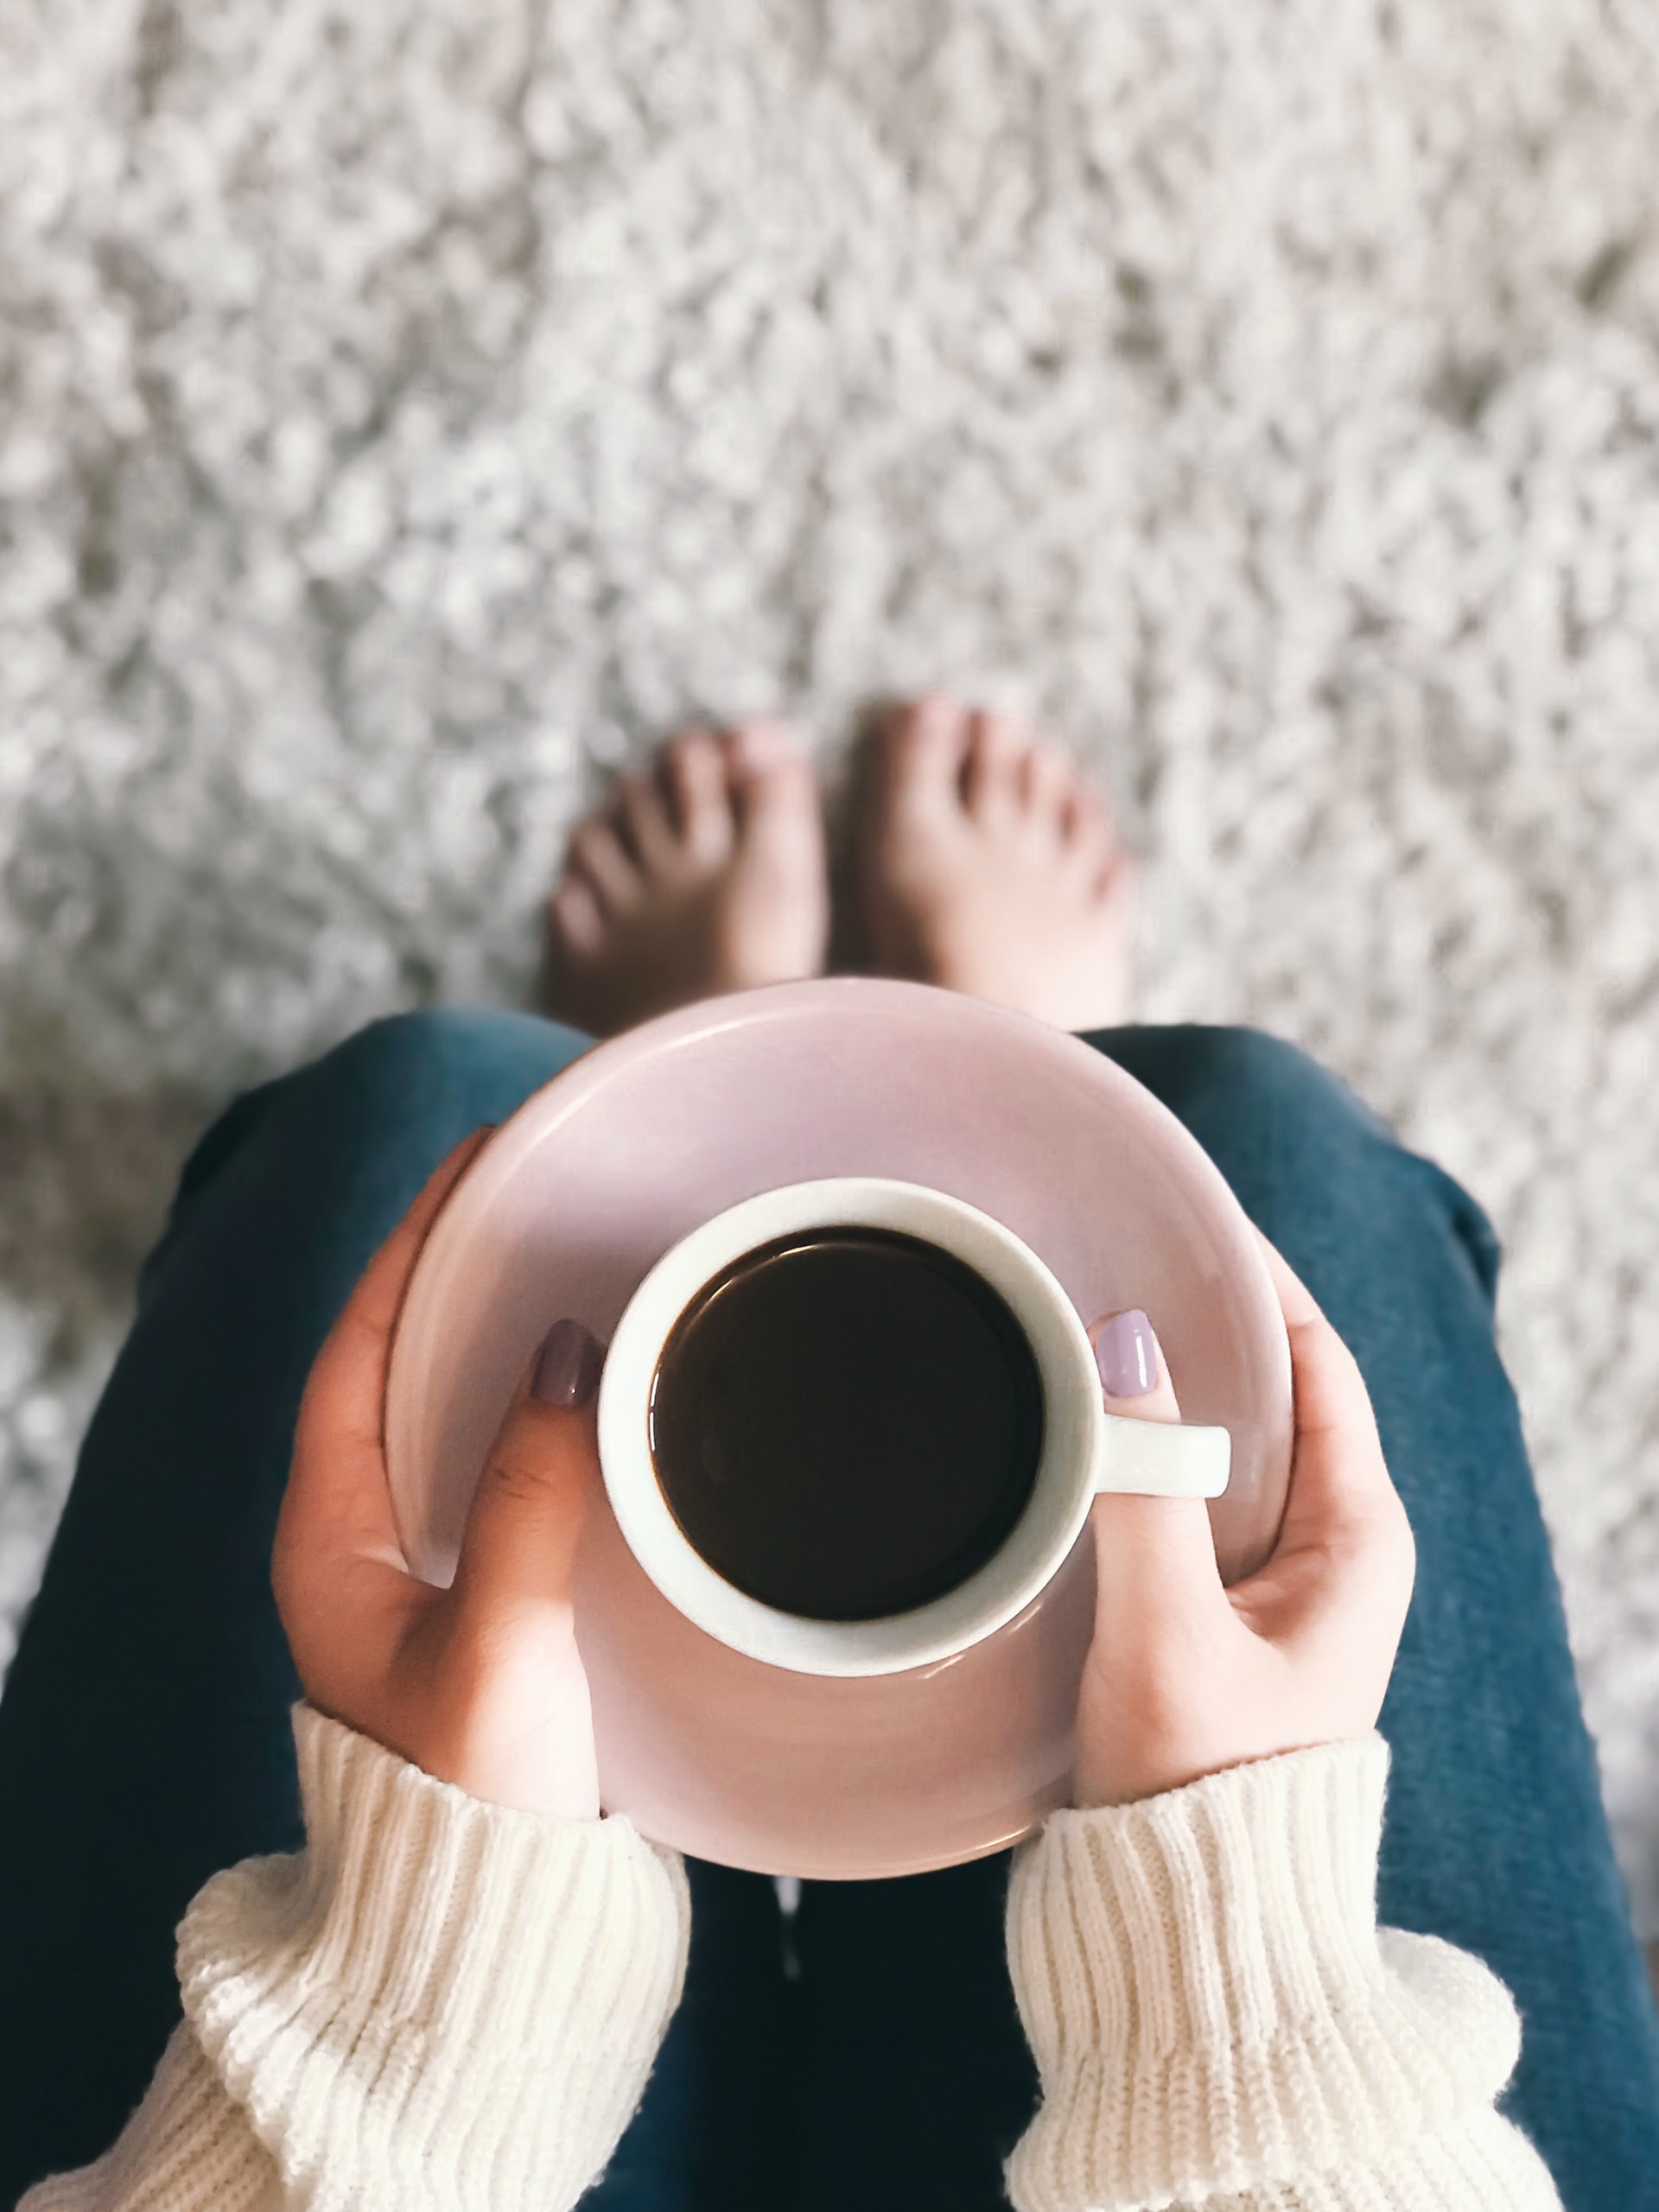 However, analysis of the data showed that habitual coffee drinking was positively associated with the cognitive areas of executive function, attention, and the PACC score. Drinking higher amounts of coffee was associated with slower cognitive decline in these areas over the course of the study.